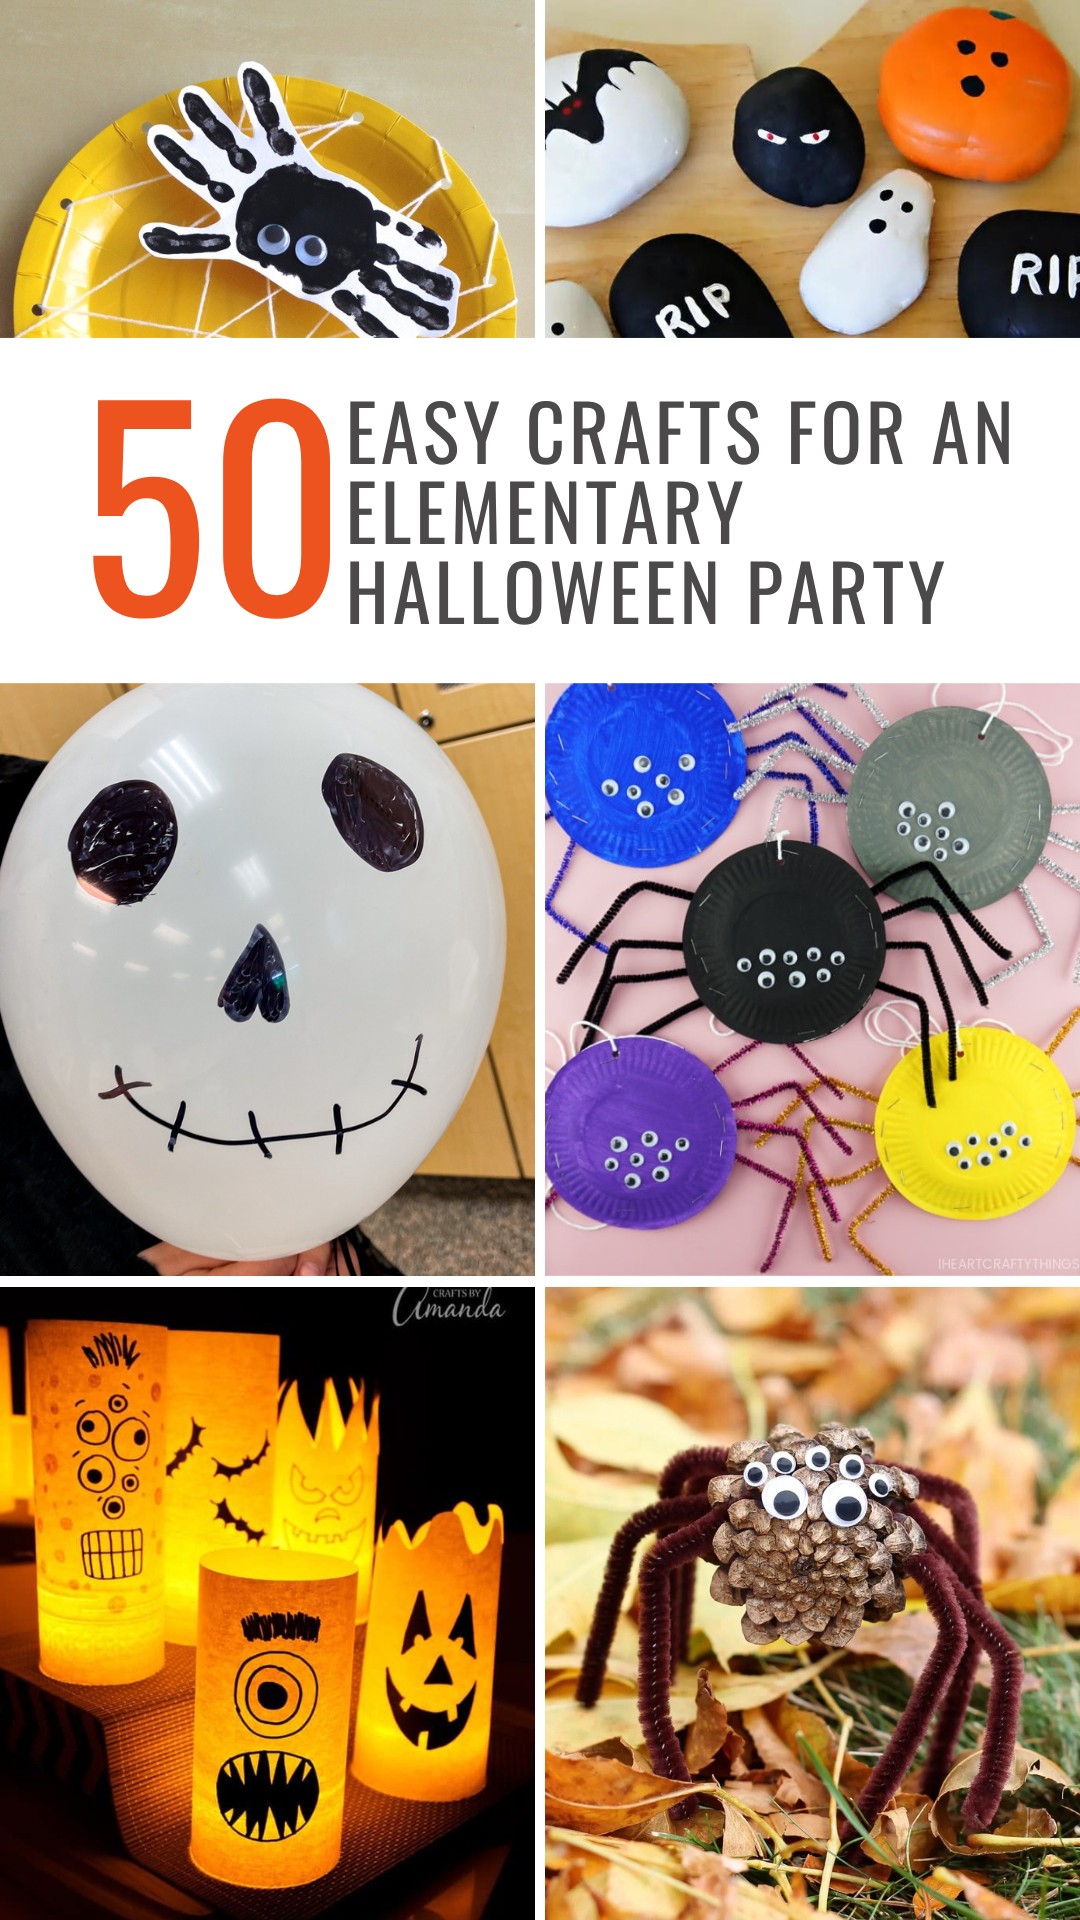 50 Easy Crafts for an Elementary Halloween Party